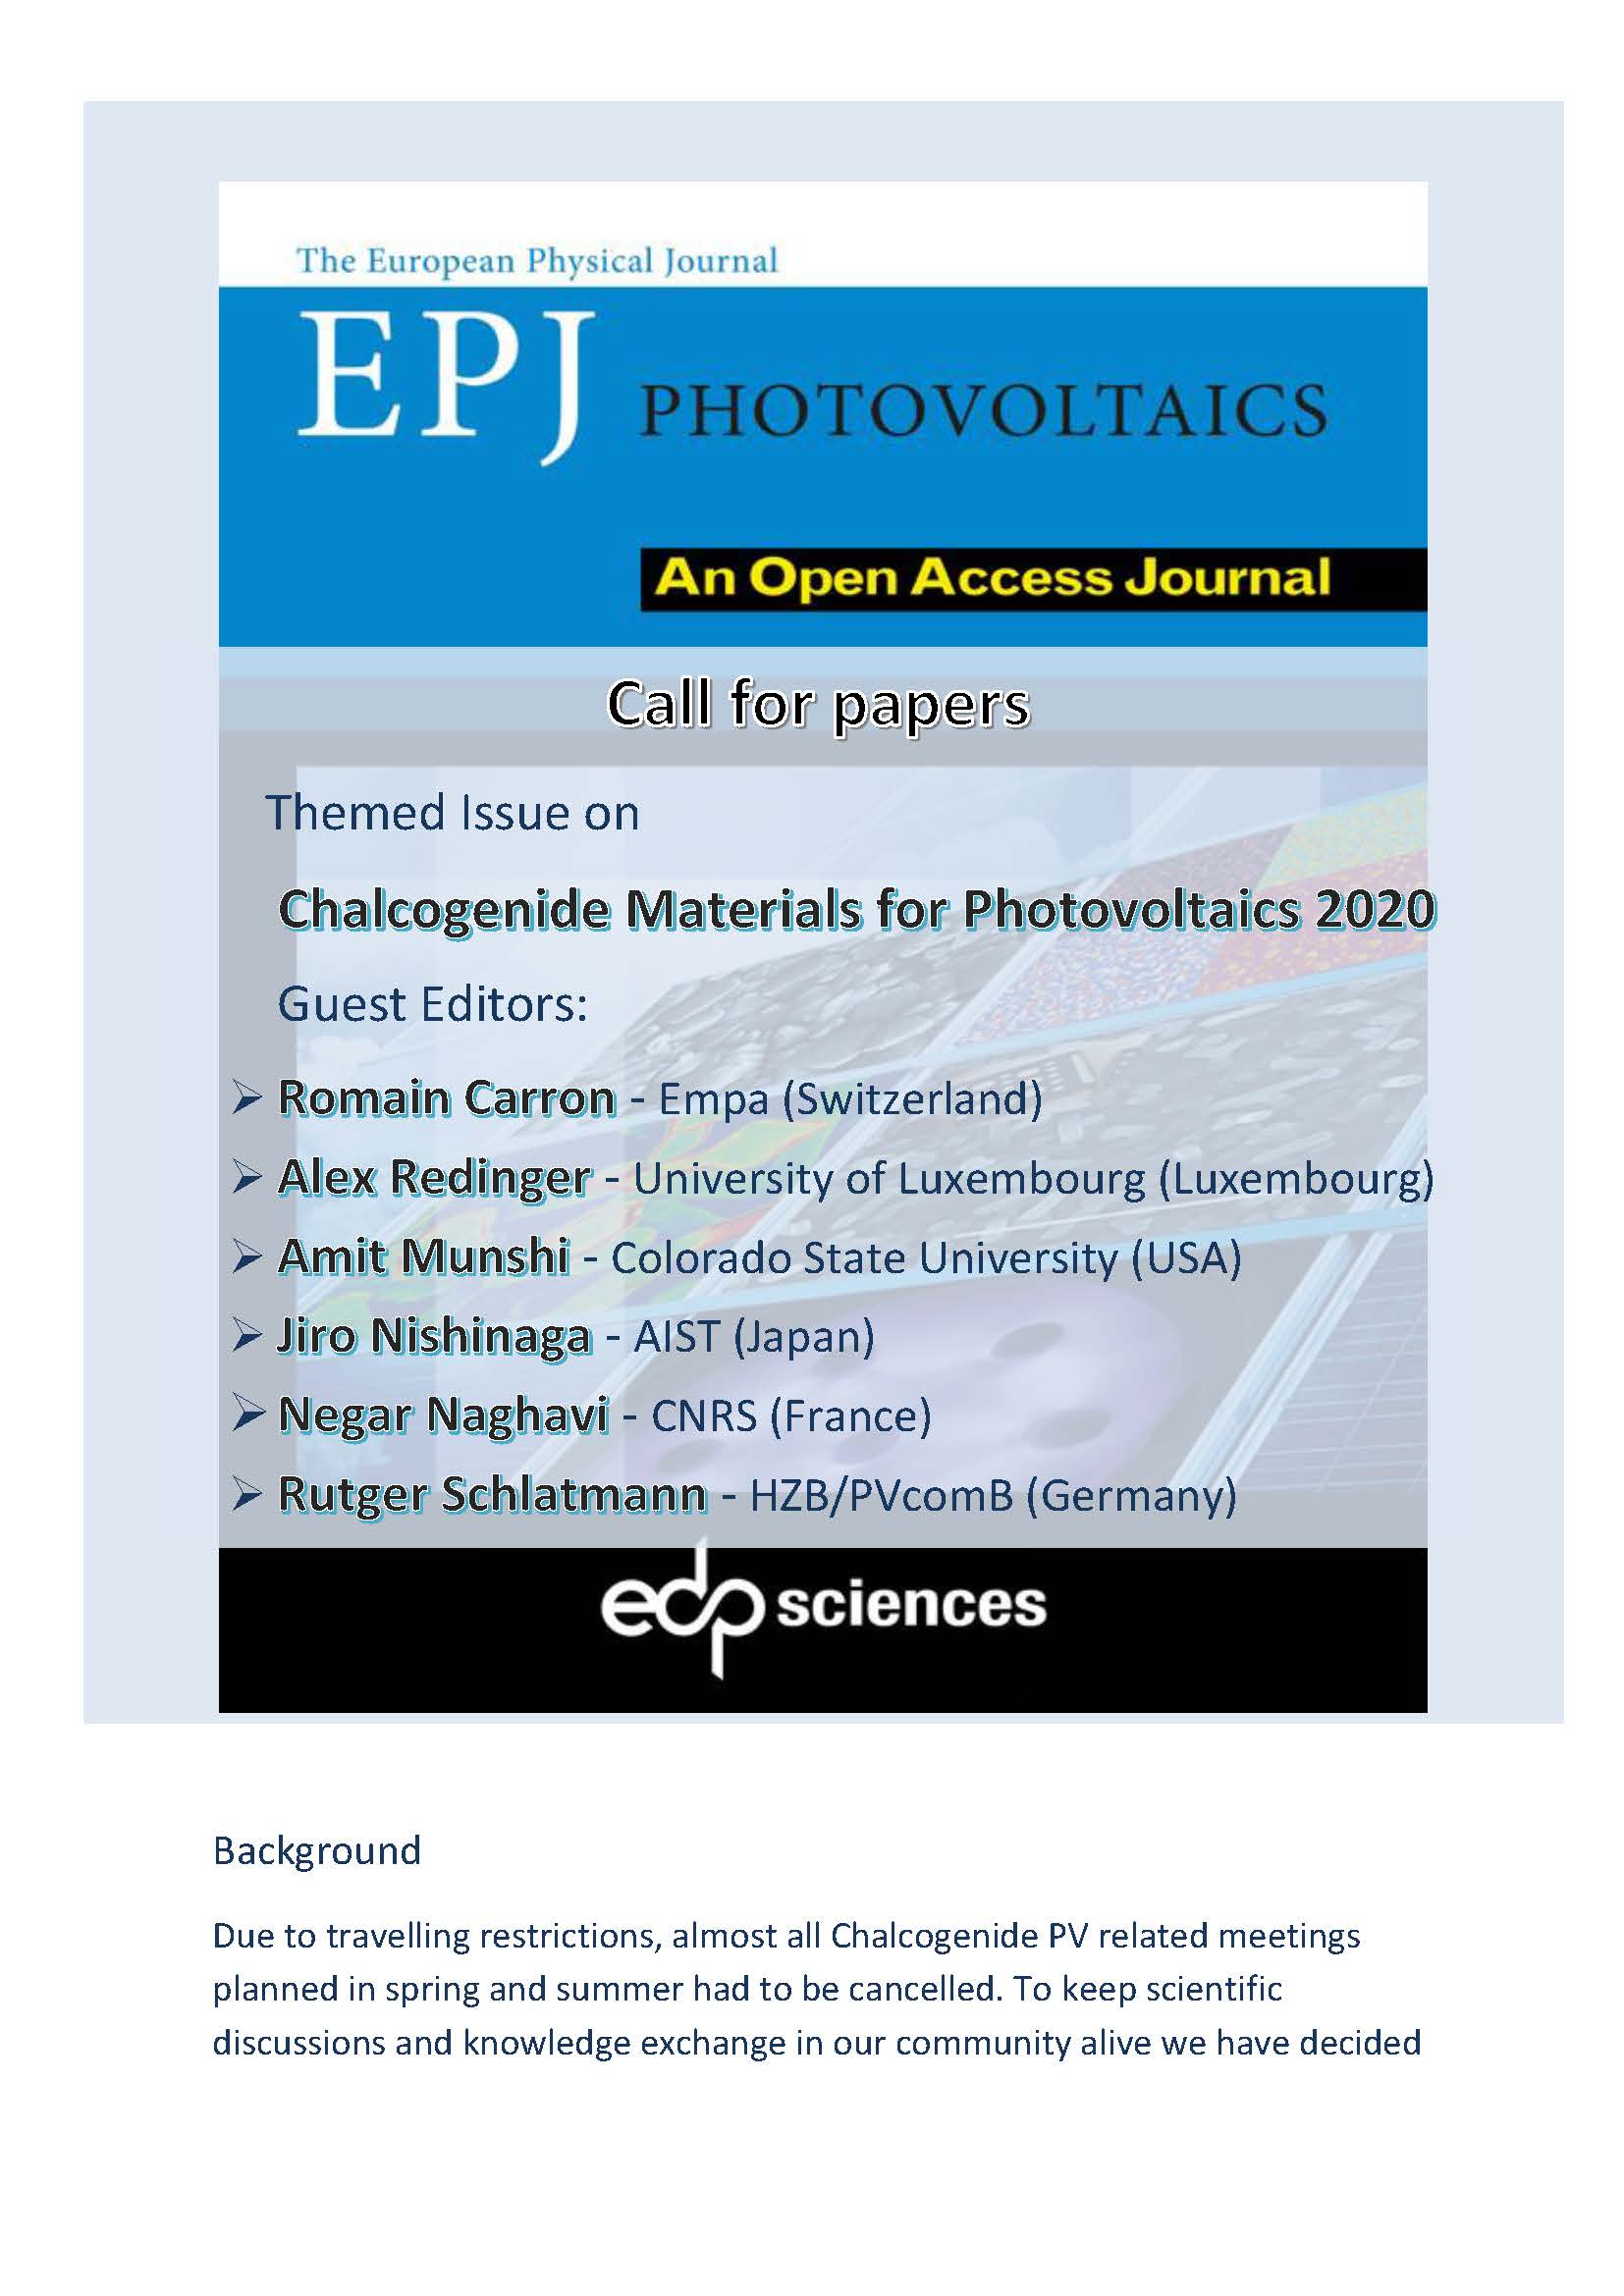 EPJ Photovoltaics - enlarged view